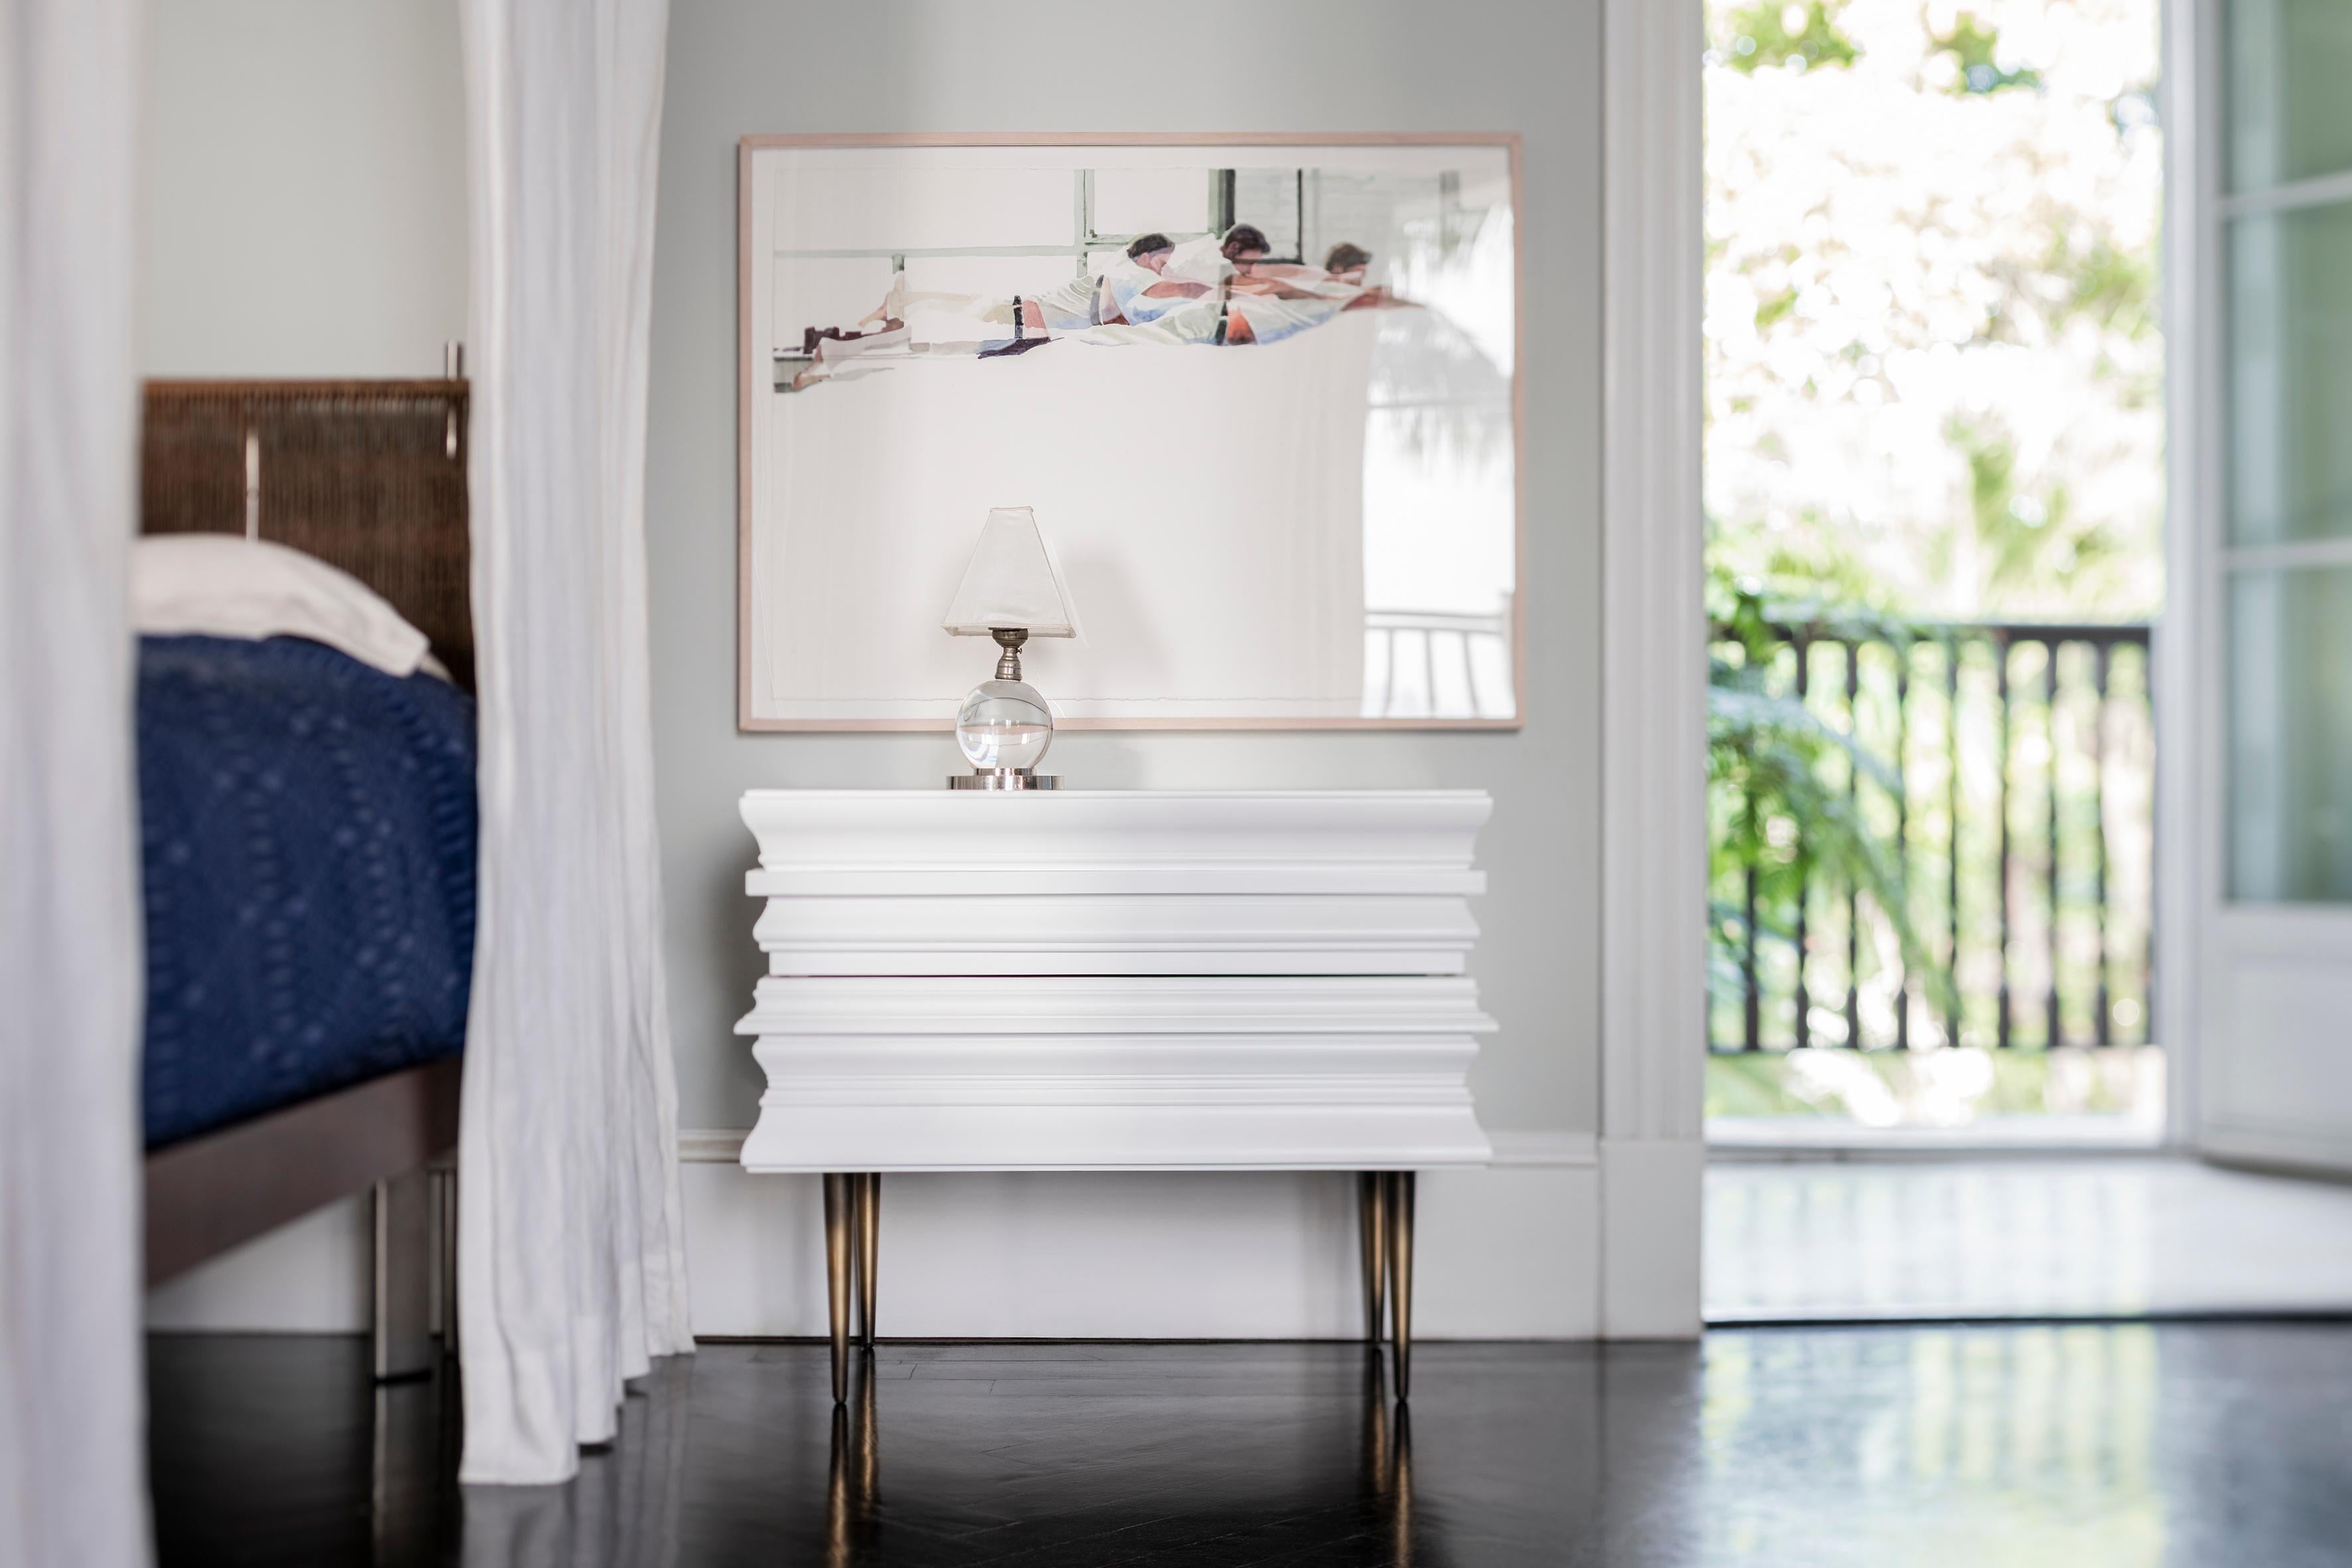 Finest crafted darkened wood moldings with a sleek highlight of silver lacquered nightstands. Moldings are applied to conceal drawers and acting as handles for the nightstands. The process to achieve the nightstand ’s surface is the result of the